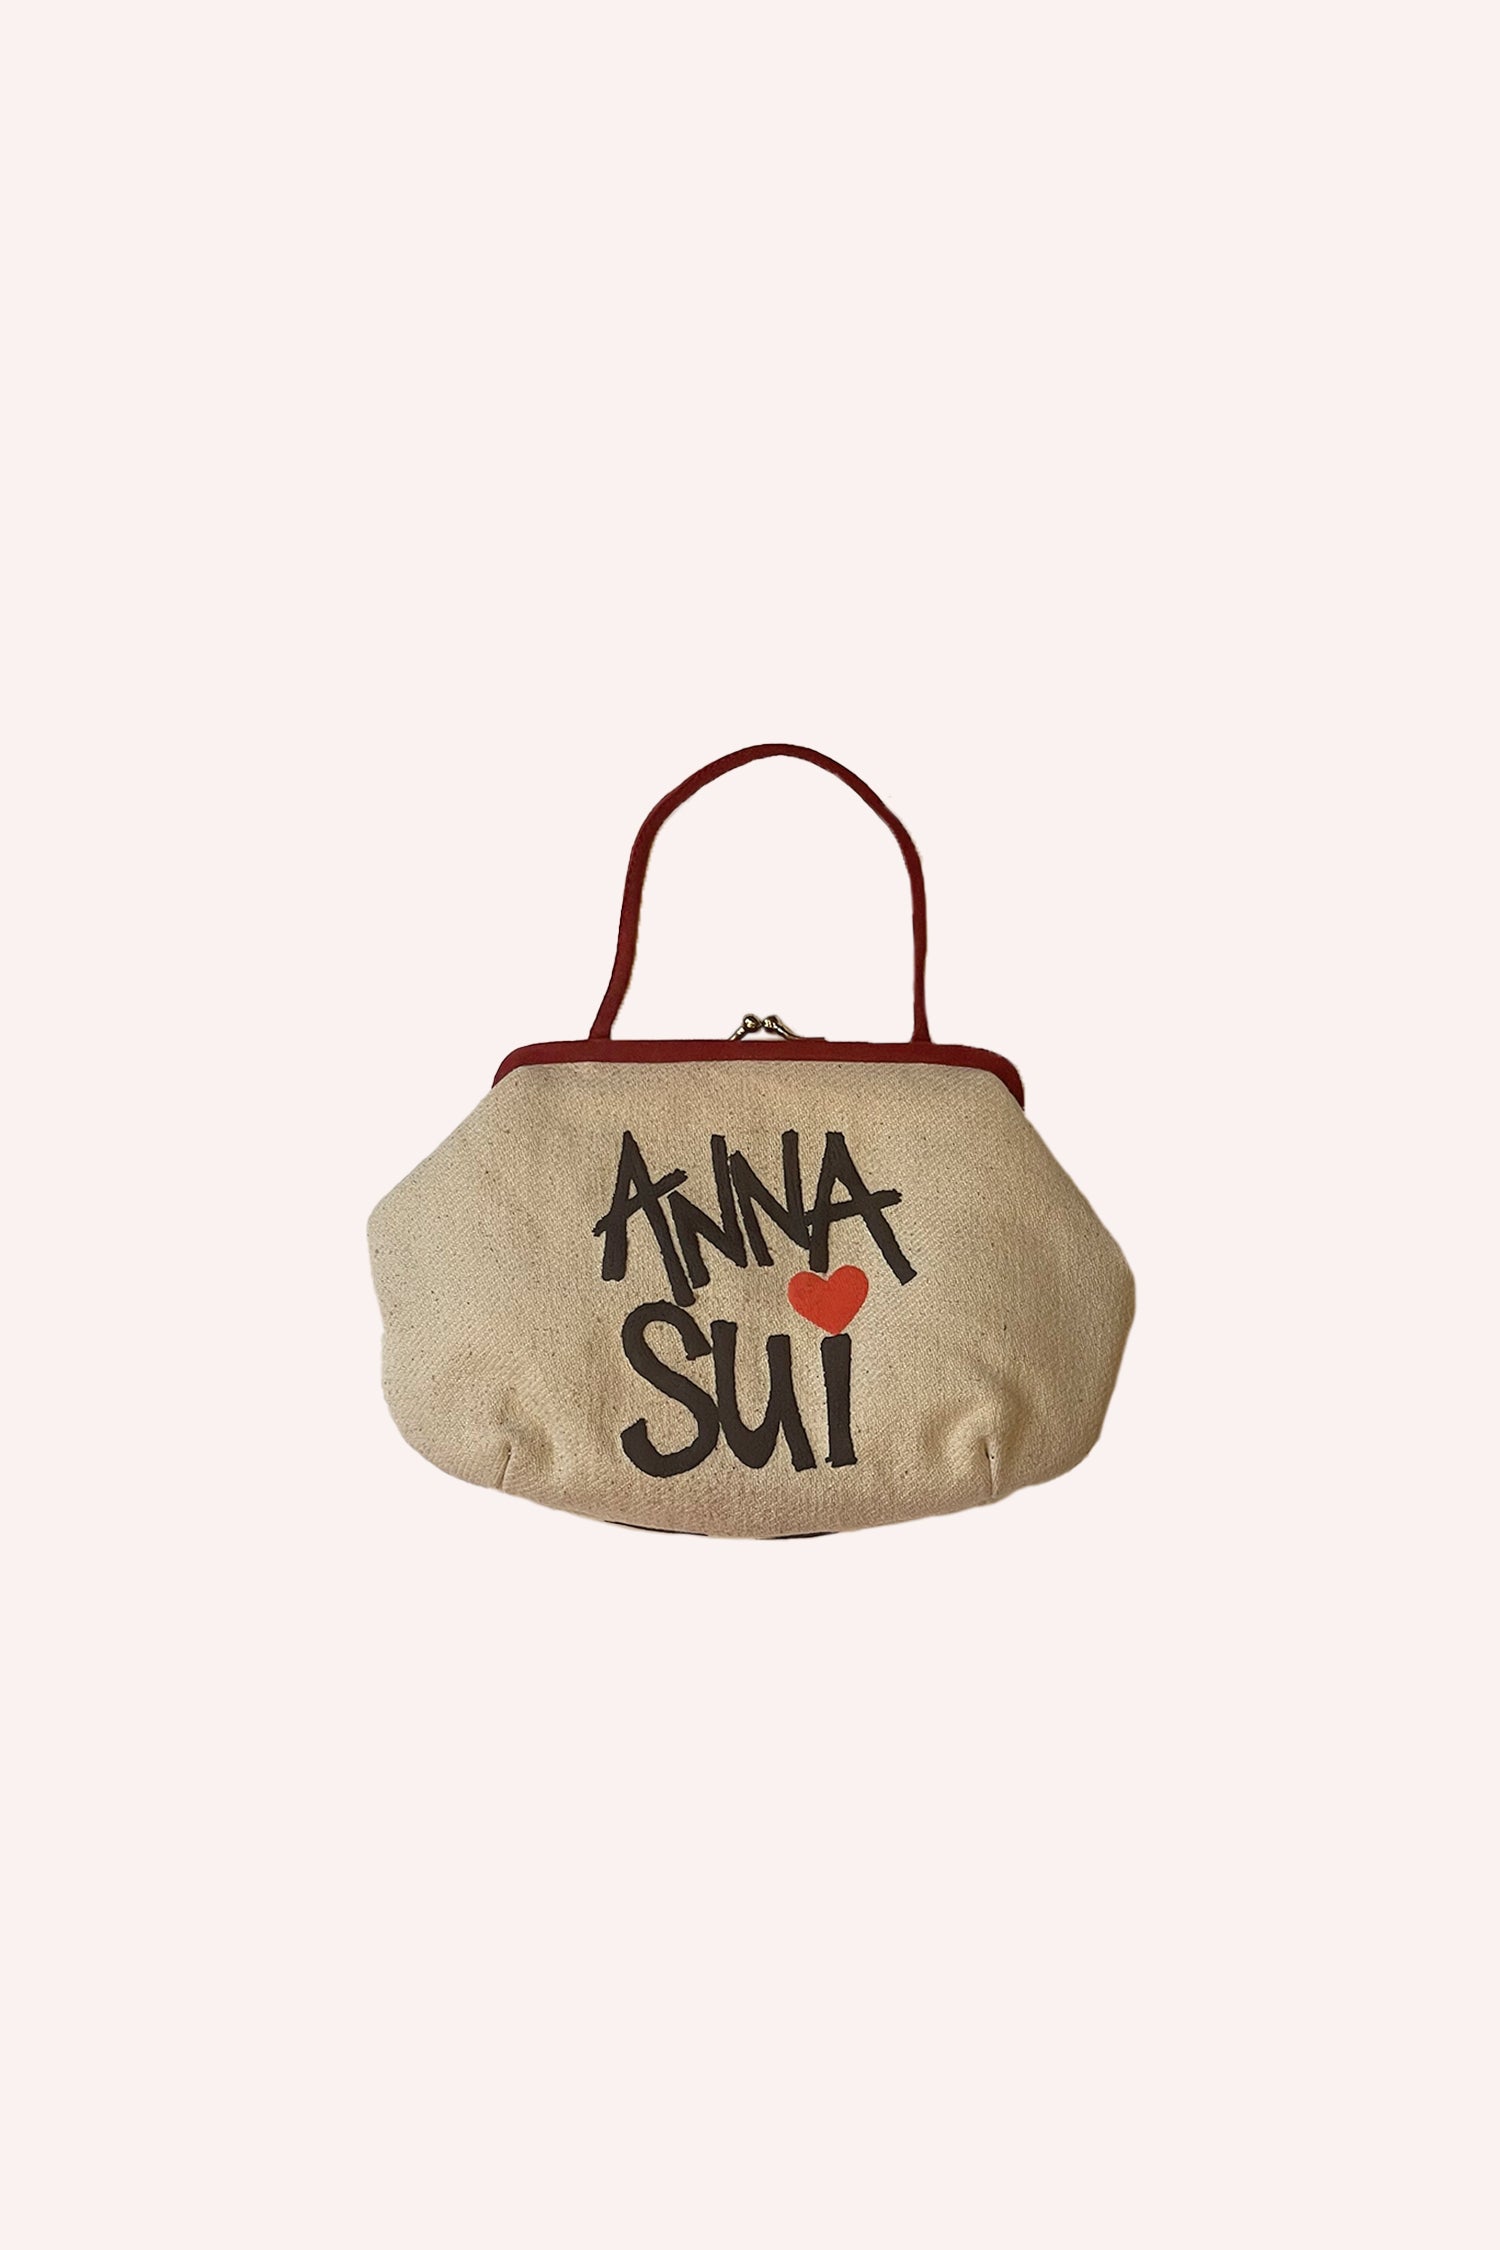 ANNA SUI PINK Quilted Holdall Bag GWP £12.99 - PicClick UK